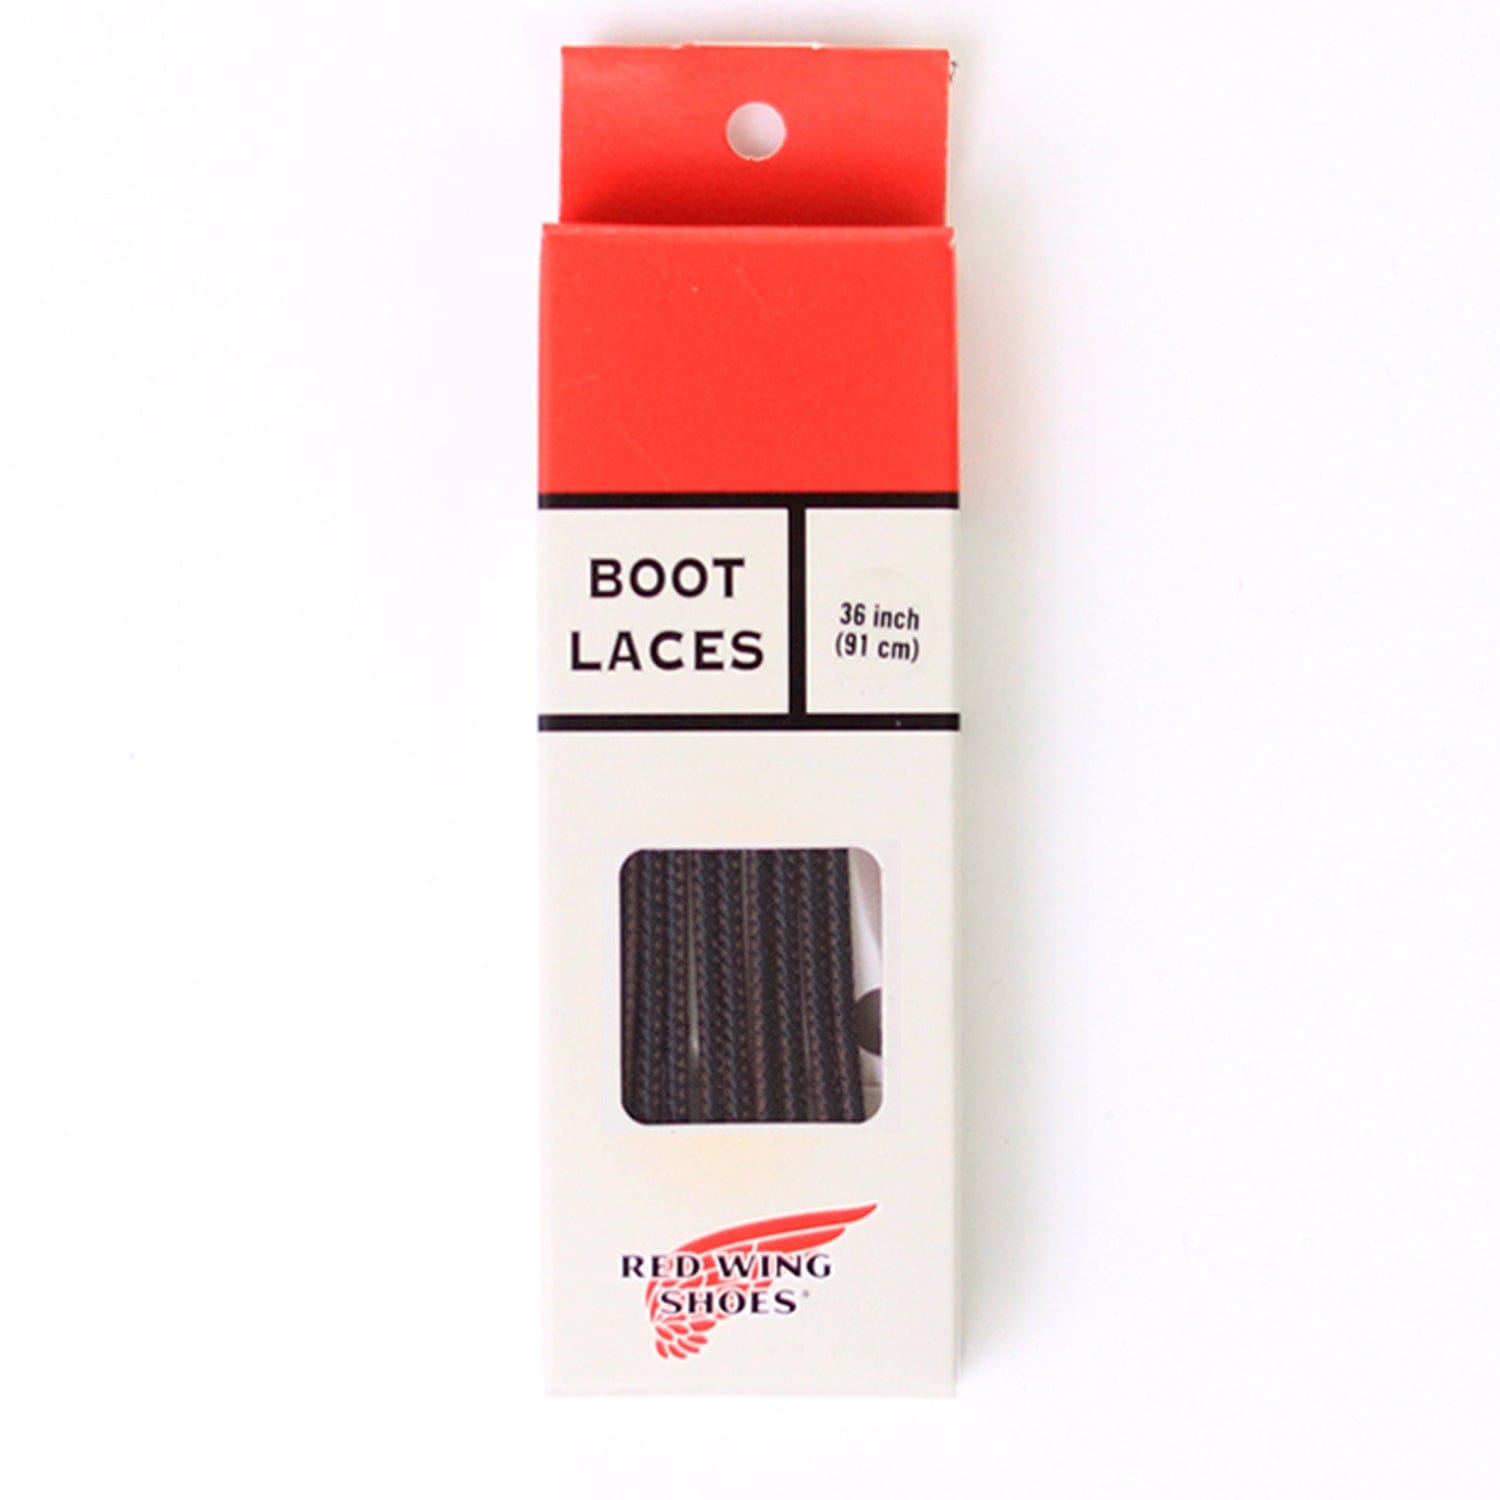 36 boot laces